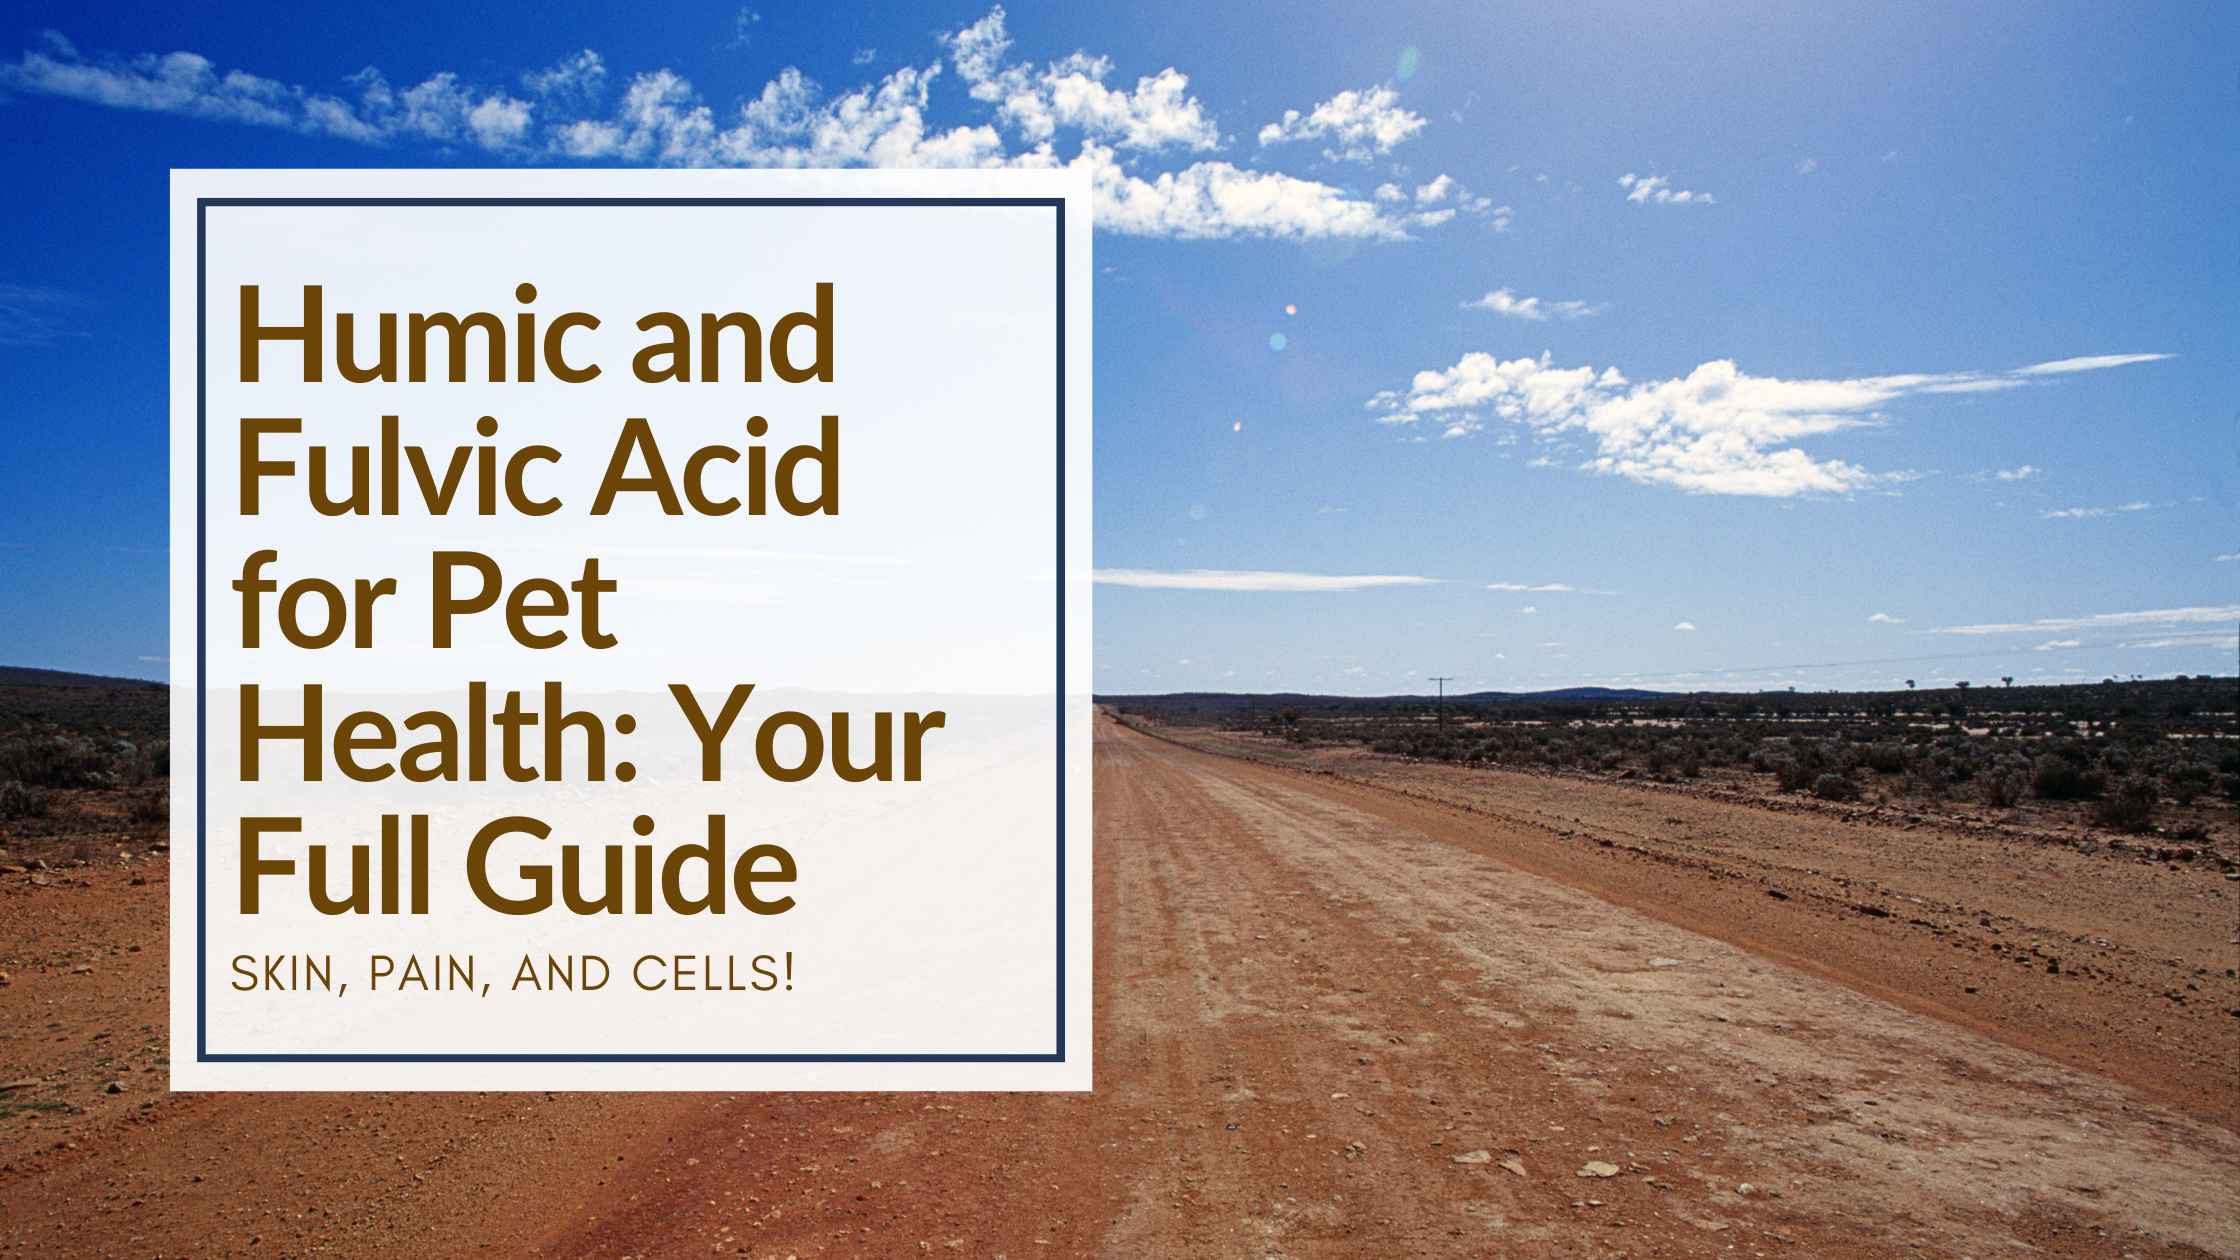 Humic and Fulvic Acid for Pet Health: Your Full Guide